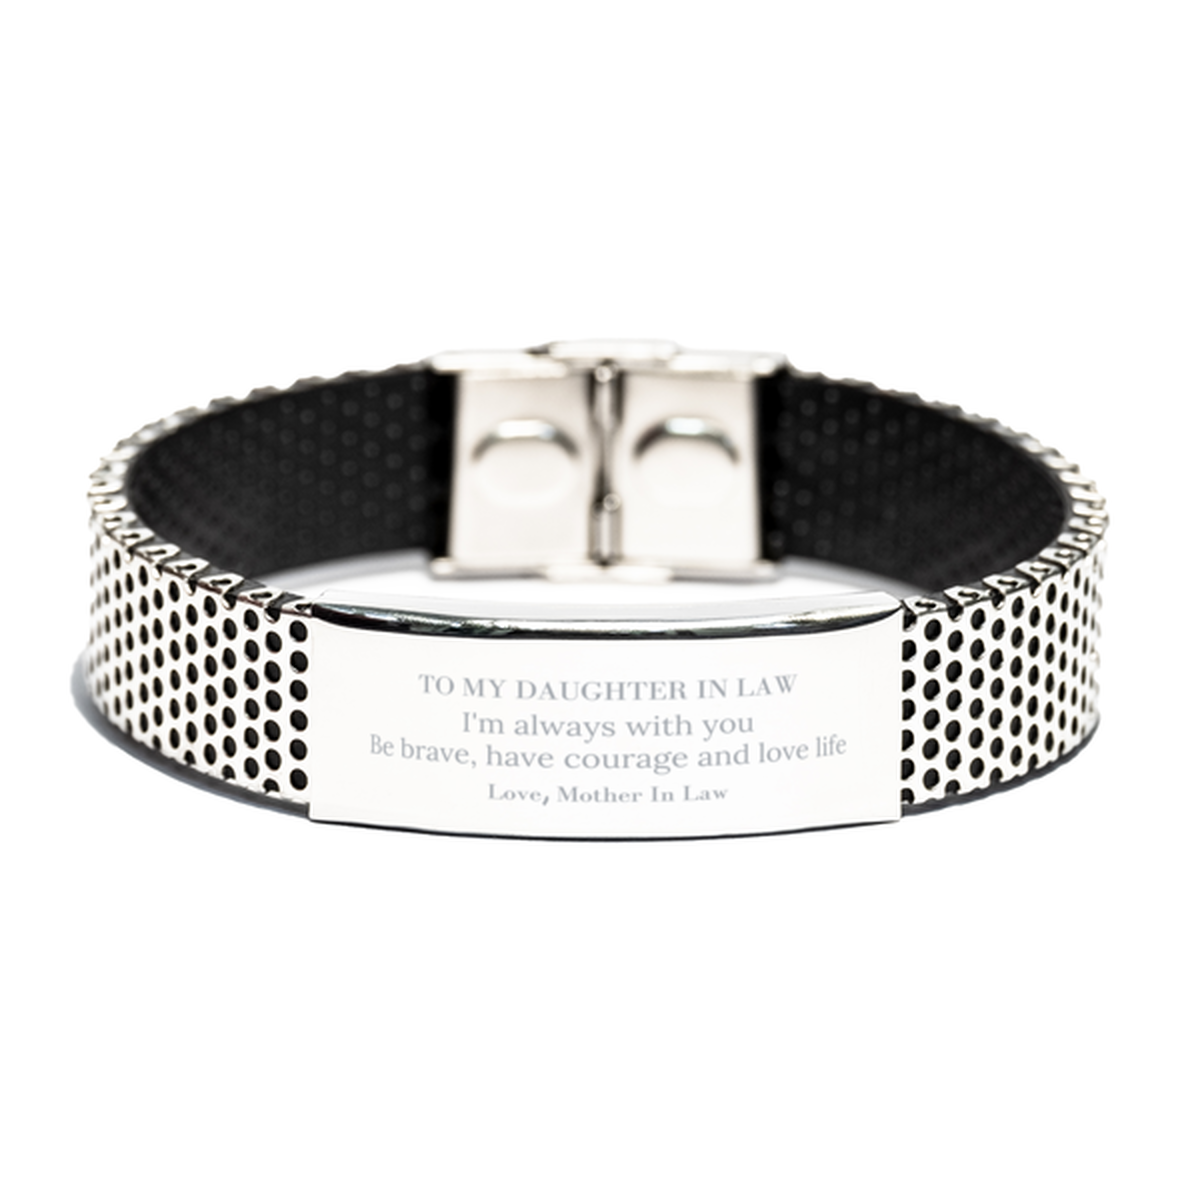 To My Daughter In Law Gifts from Mother In Law, Unique Stainless Steel Bracelet Inspirational Christmas Birthday Graduation Gifts for Daughter In Law I'm always with you. Be brave, have courage and love life. Love, Mother In Law